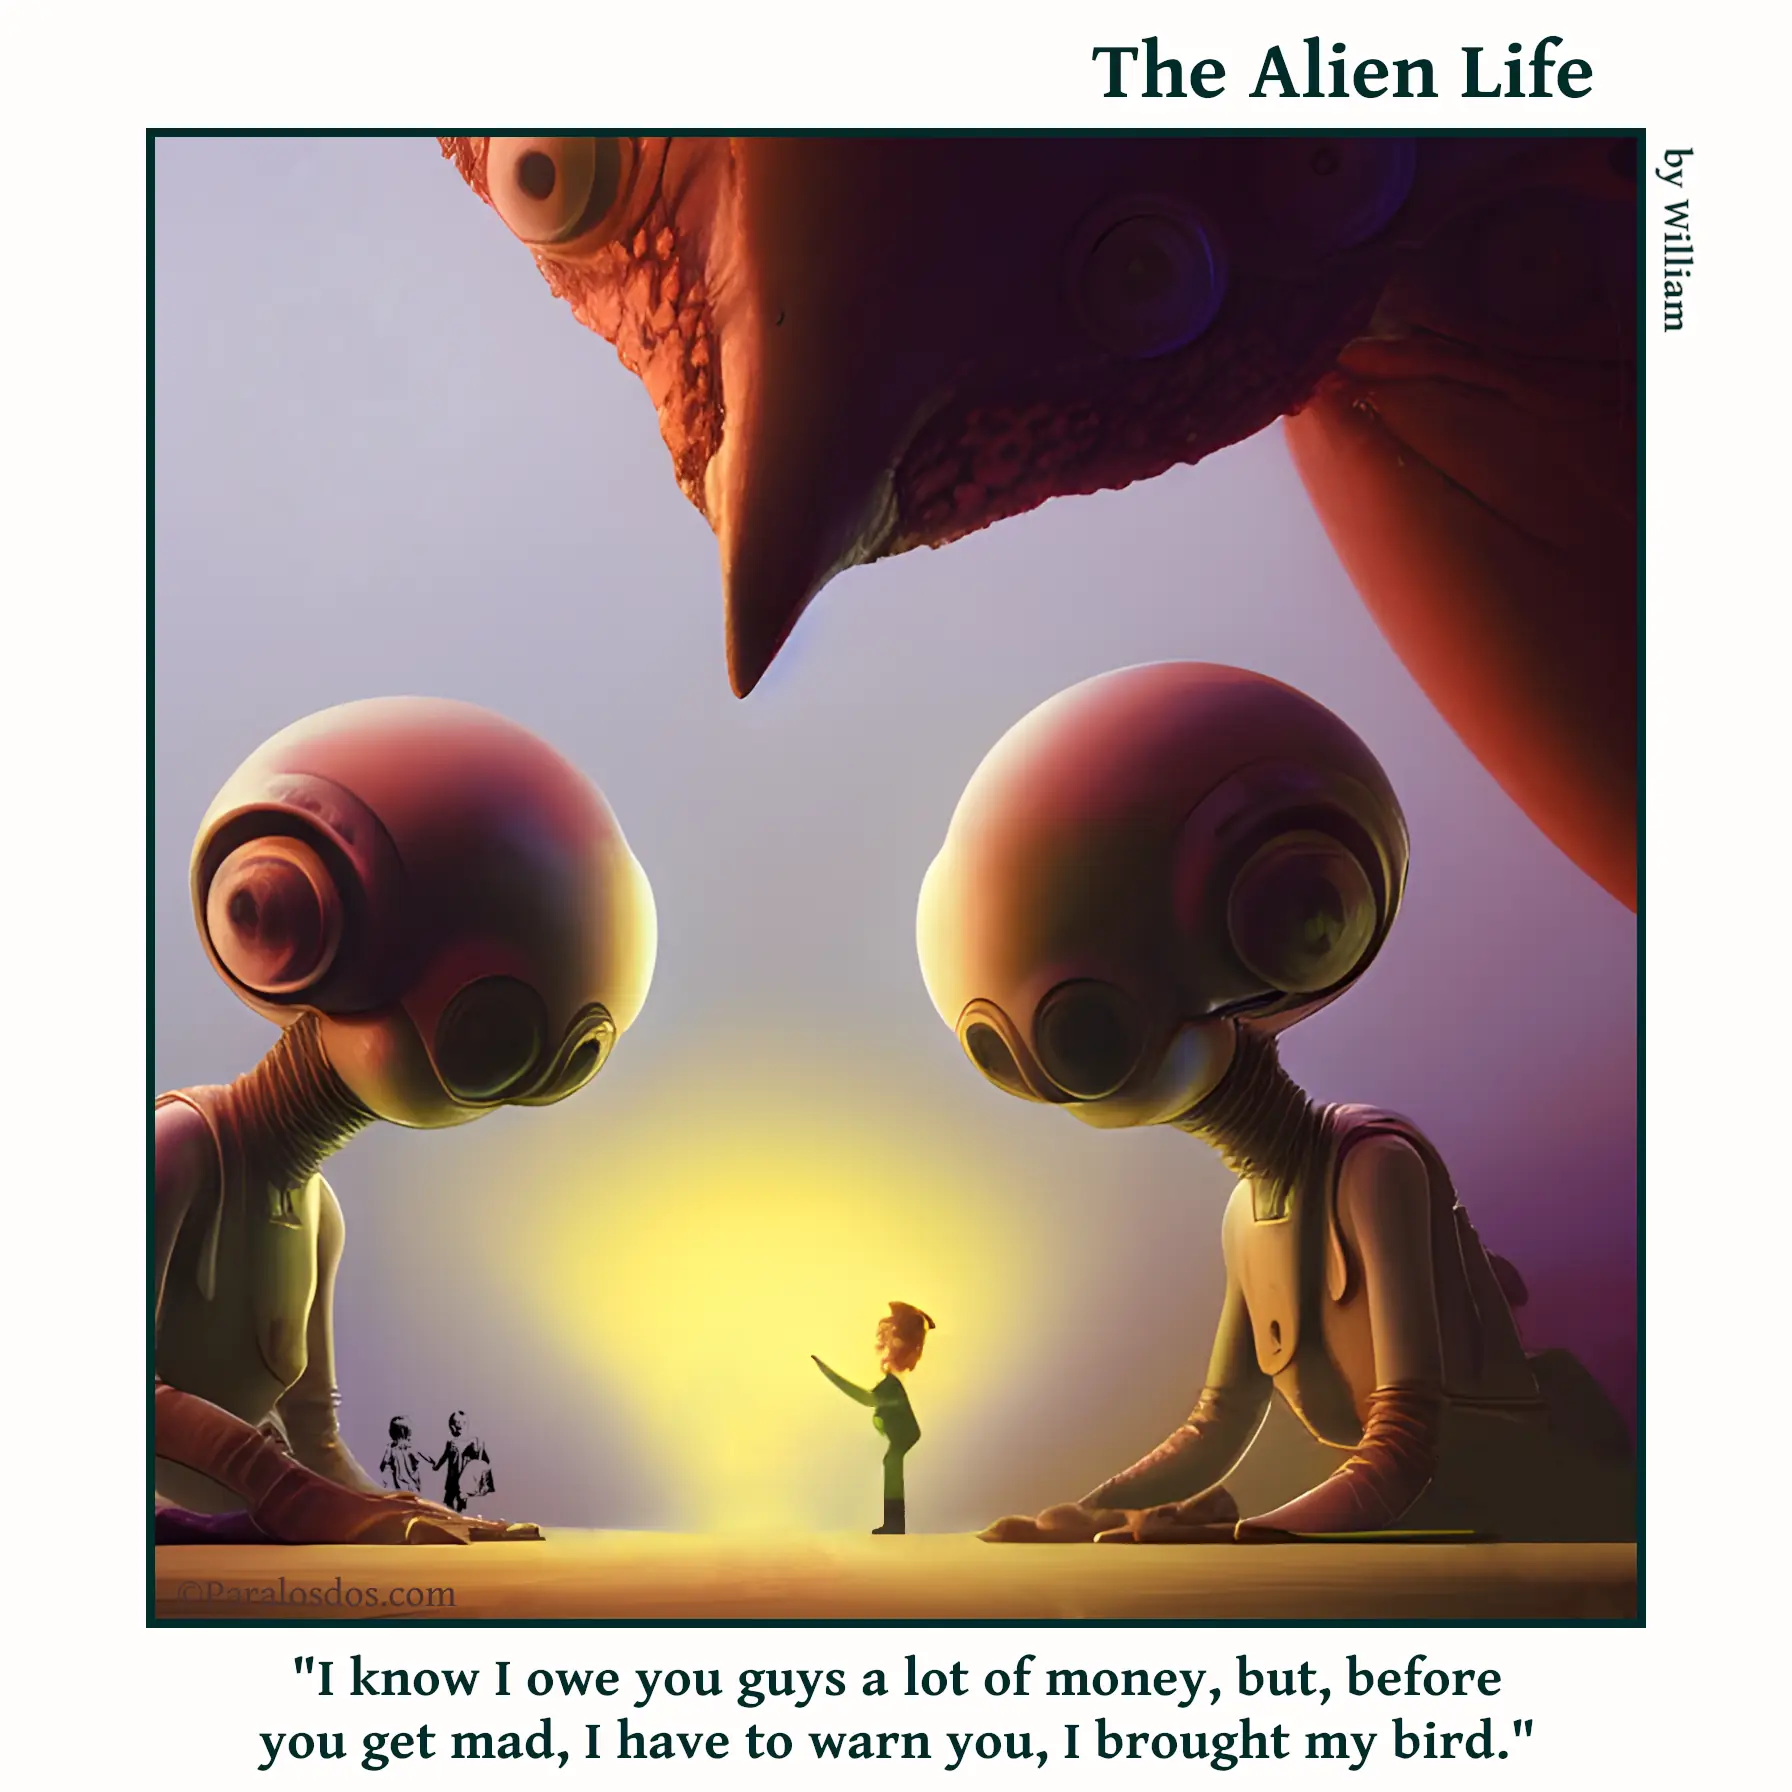 The Alien Life, one panel Comic. Two giant aliens are looking down at a very wee human. Above the giant aliens, the head of an even bigger bird is hovering. The caption reads: "I know I owe you guys a lot of money, but, before you get mad, I have to warn you, I brought my bird."